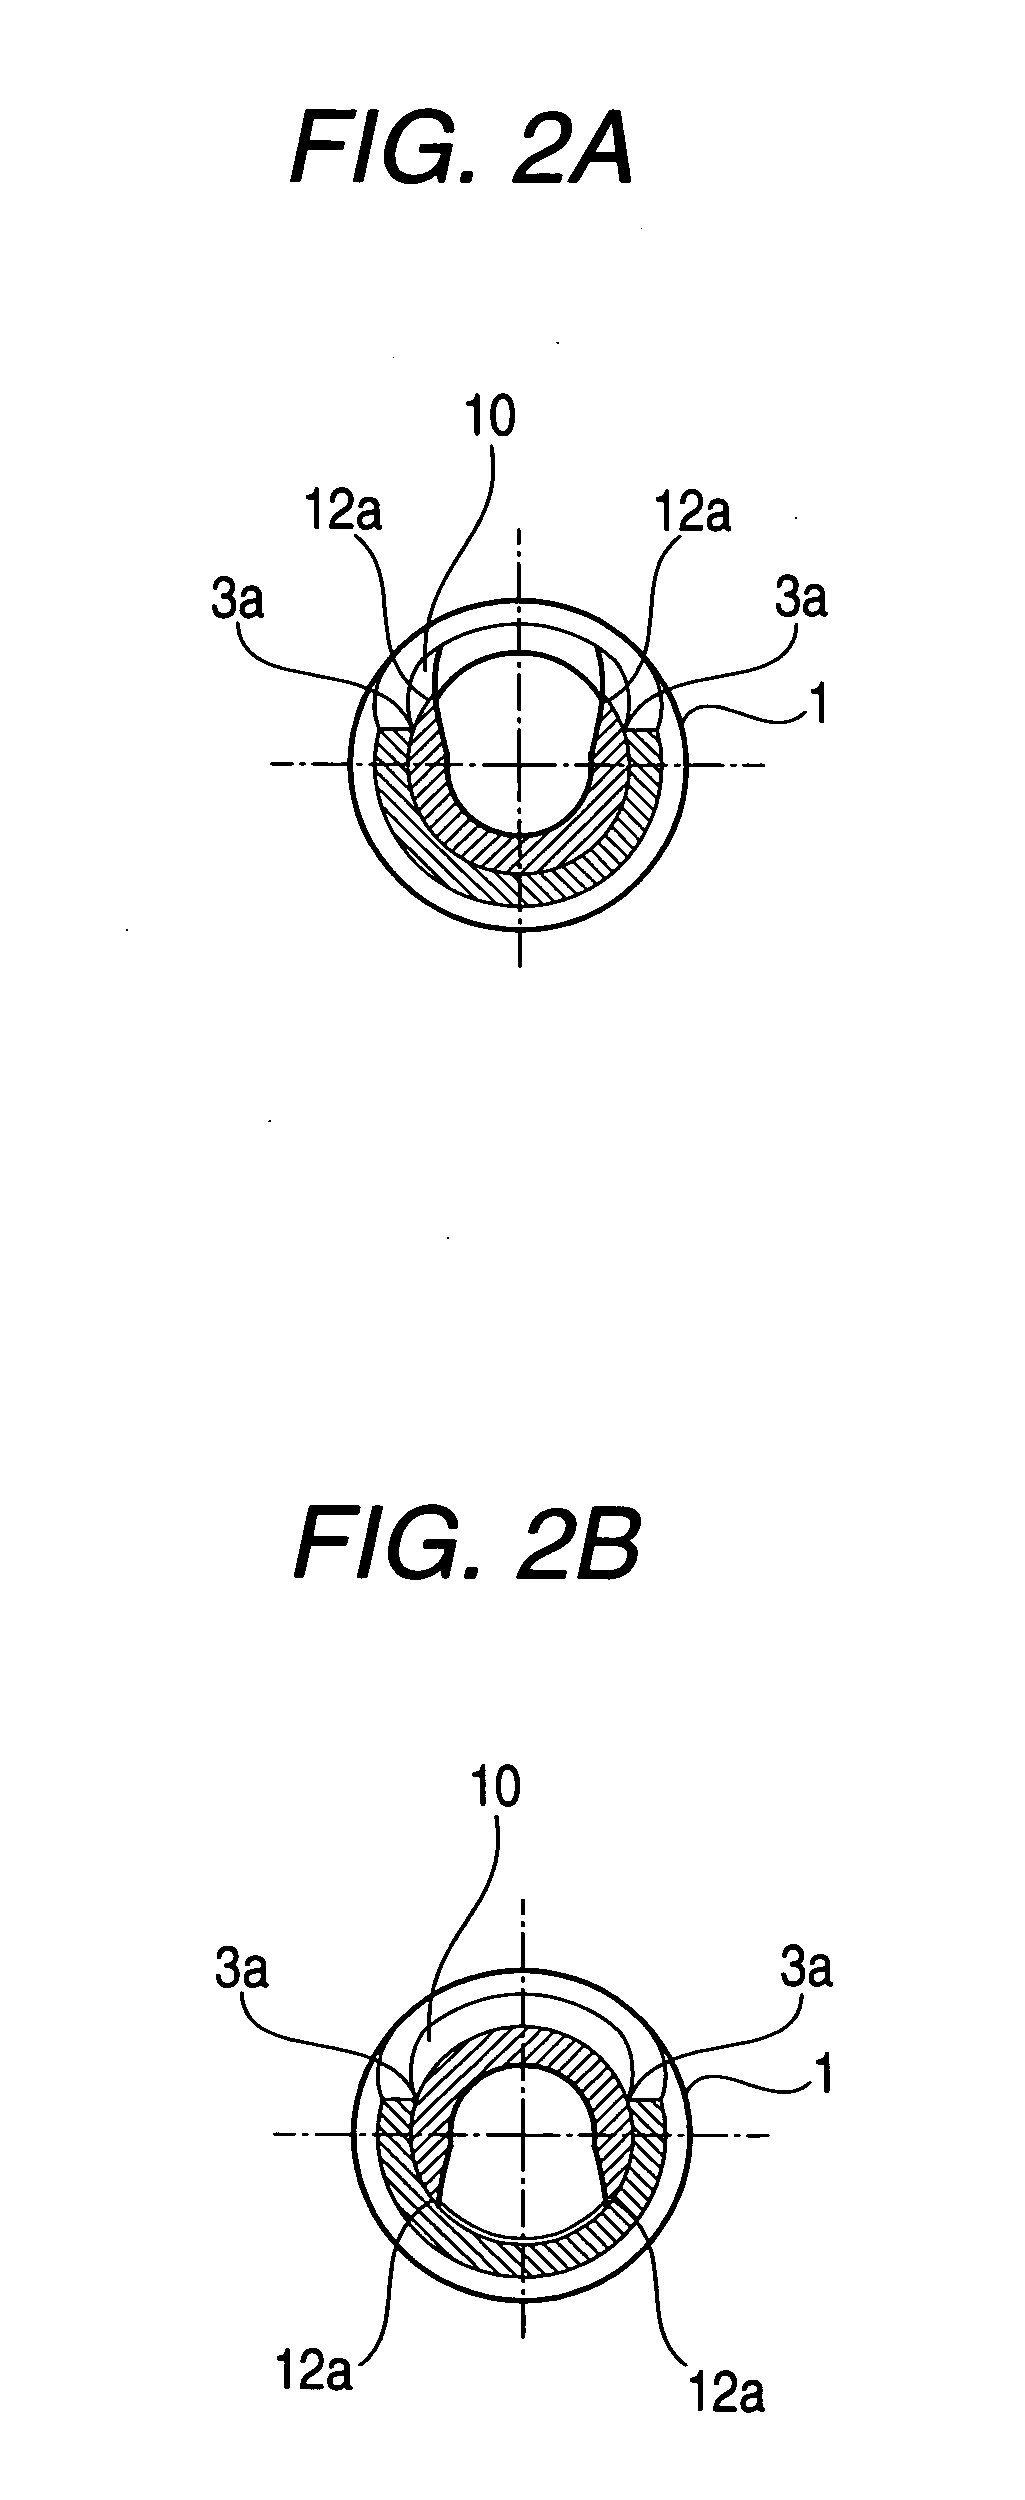 Vitreous body cutter and vitreous body surgical equipment having the same